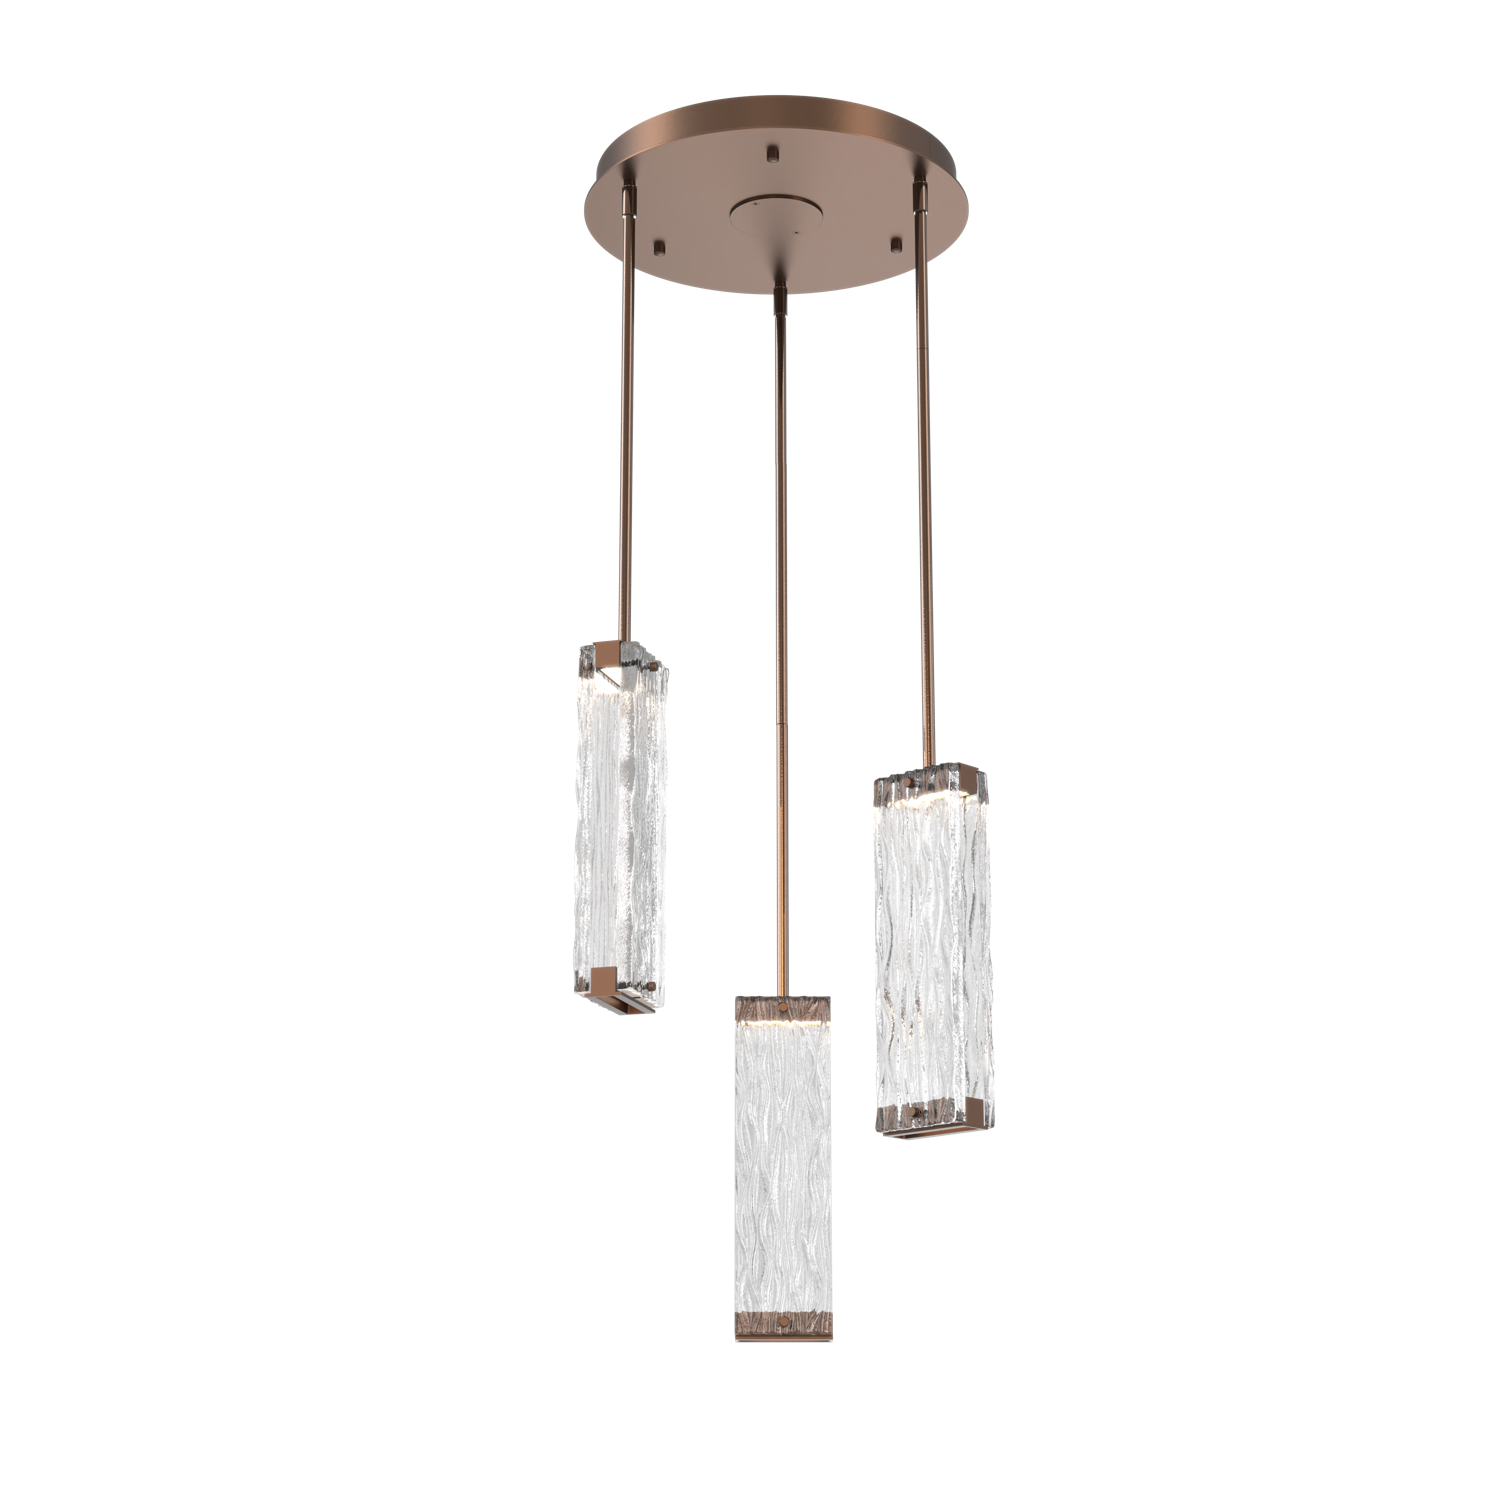 CHB0090-03-BB-TT-Hammerton-Studio-Tabulo-3-light-multi-pendant-chandelier-with-burnished-bronze-finish-and-clear-tidal-cast-glass-shade-and-LED-lamping